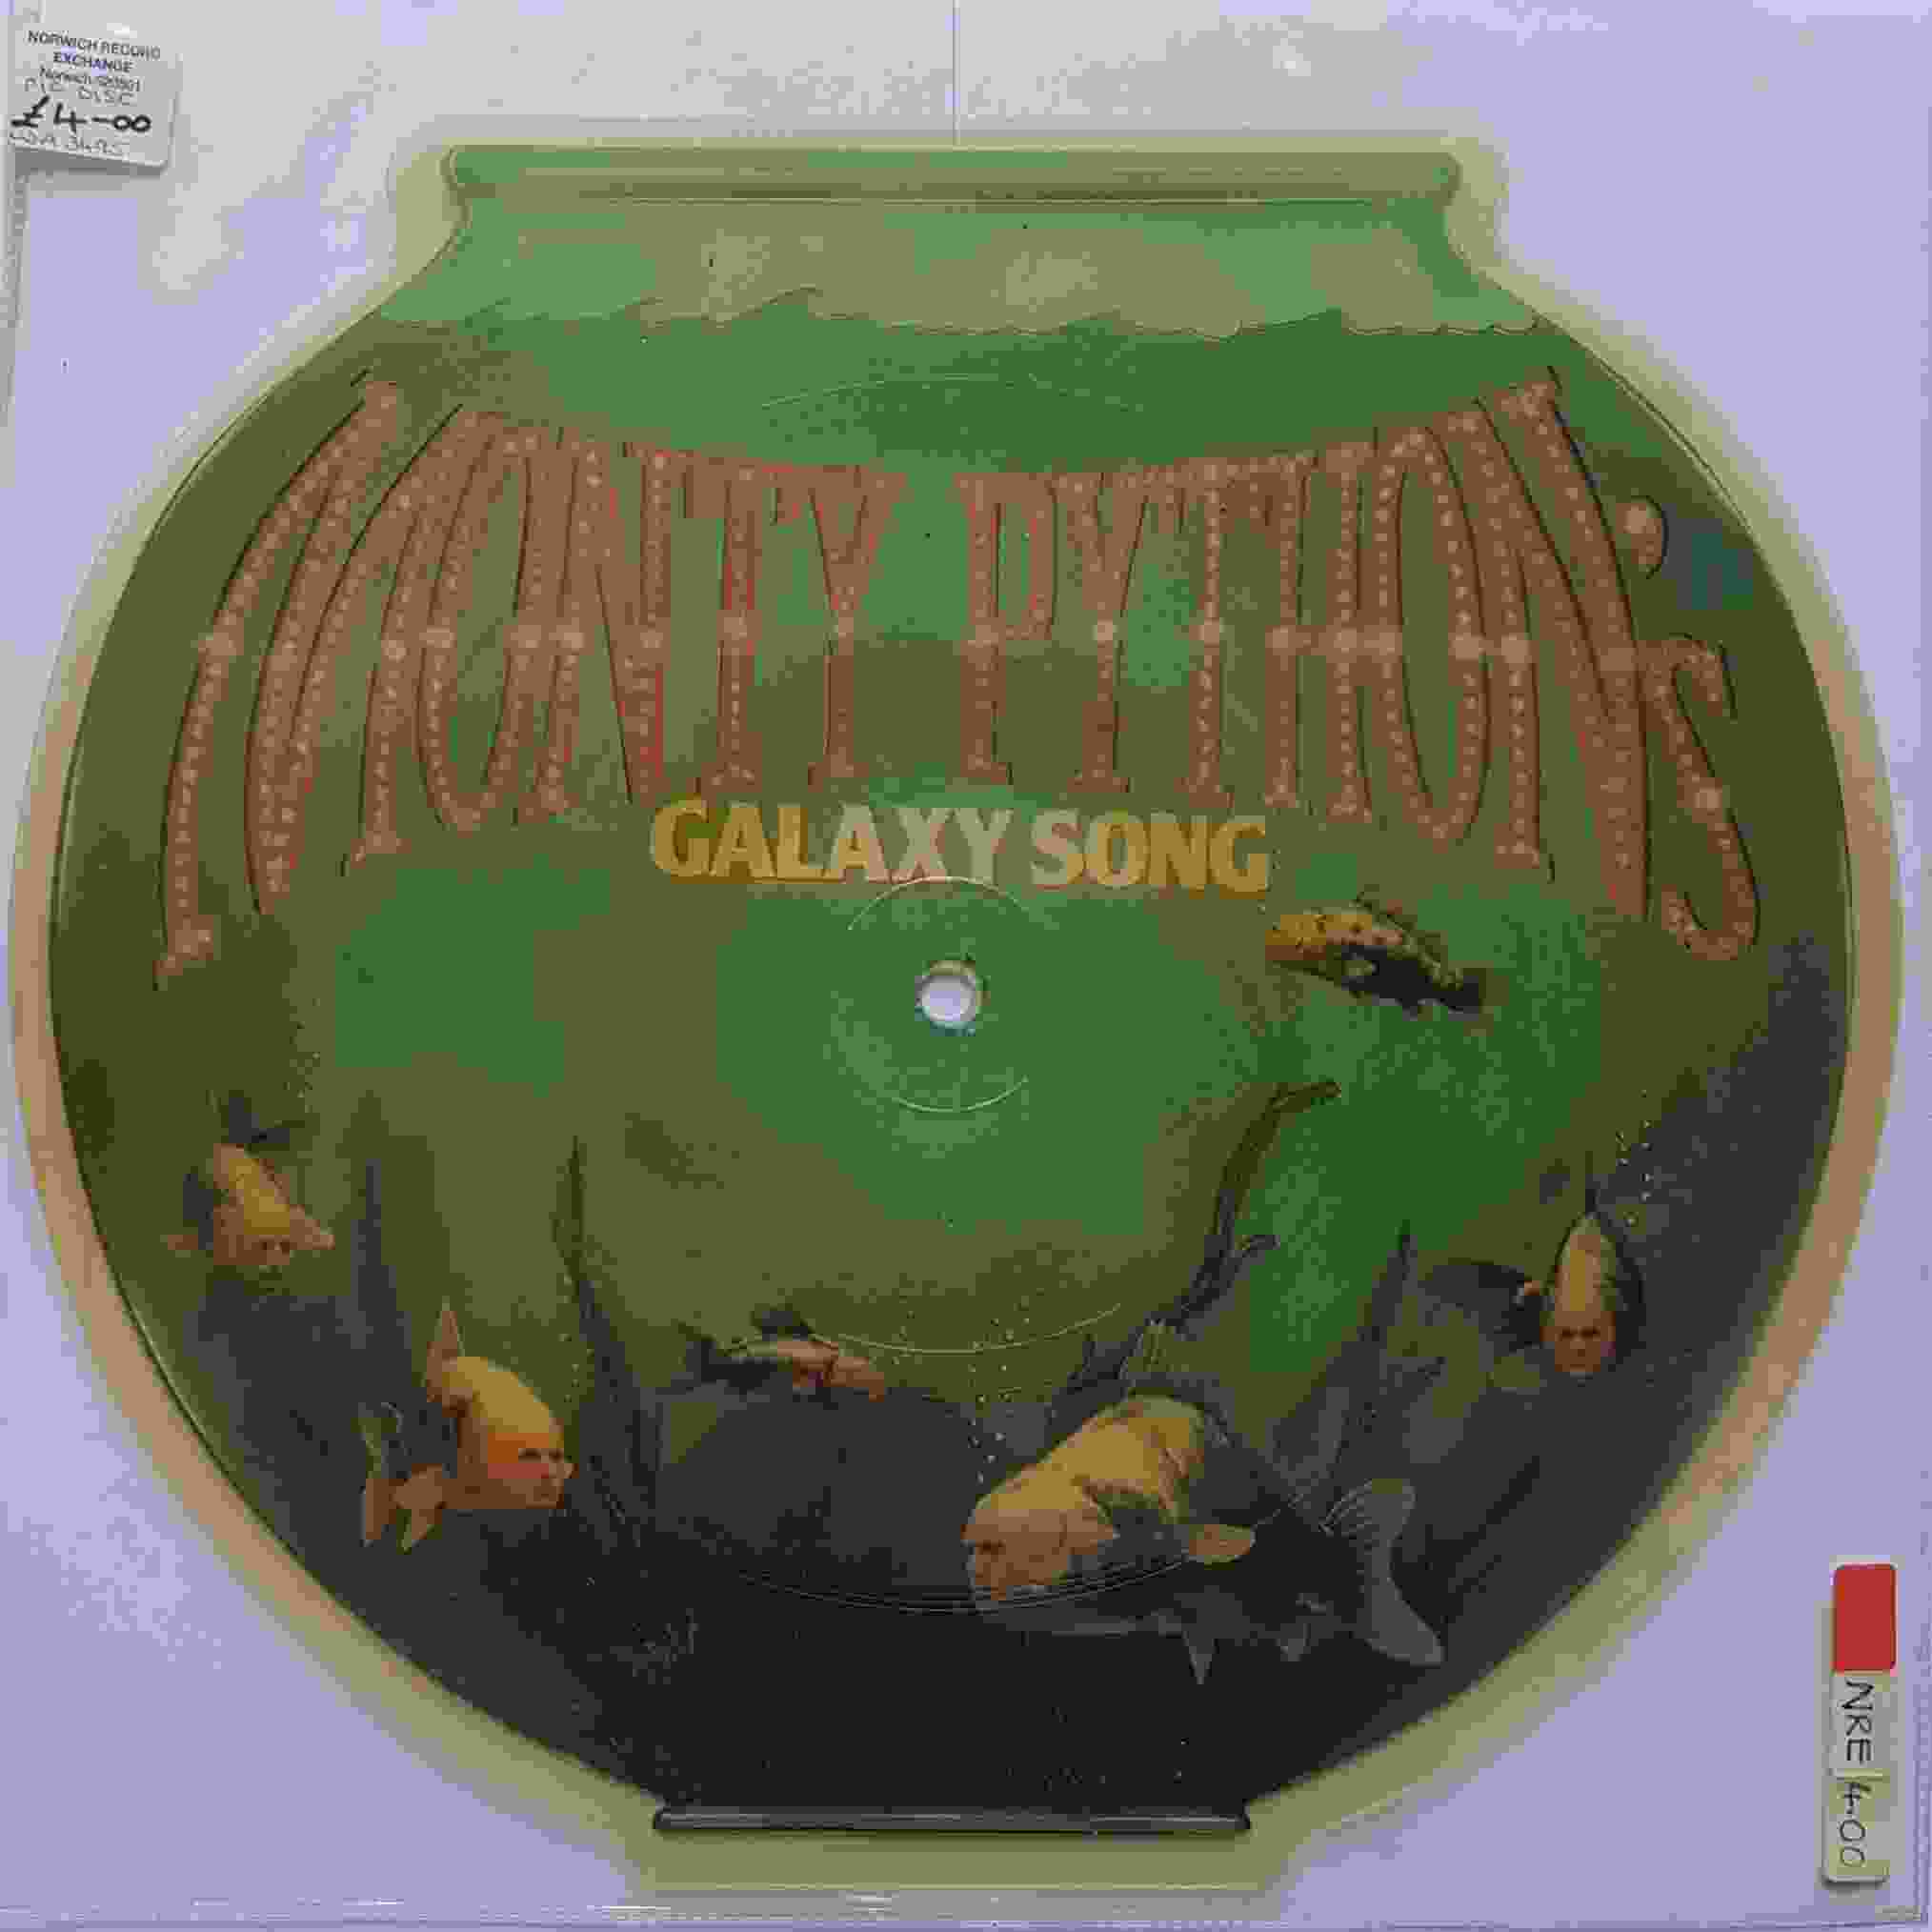 Picture of WA 3495 Galaxy song (Monty Python's flying circus) - Picture shaped disc by artist Monty Python from the BBC singles - Records and Tapes library